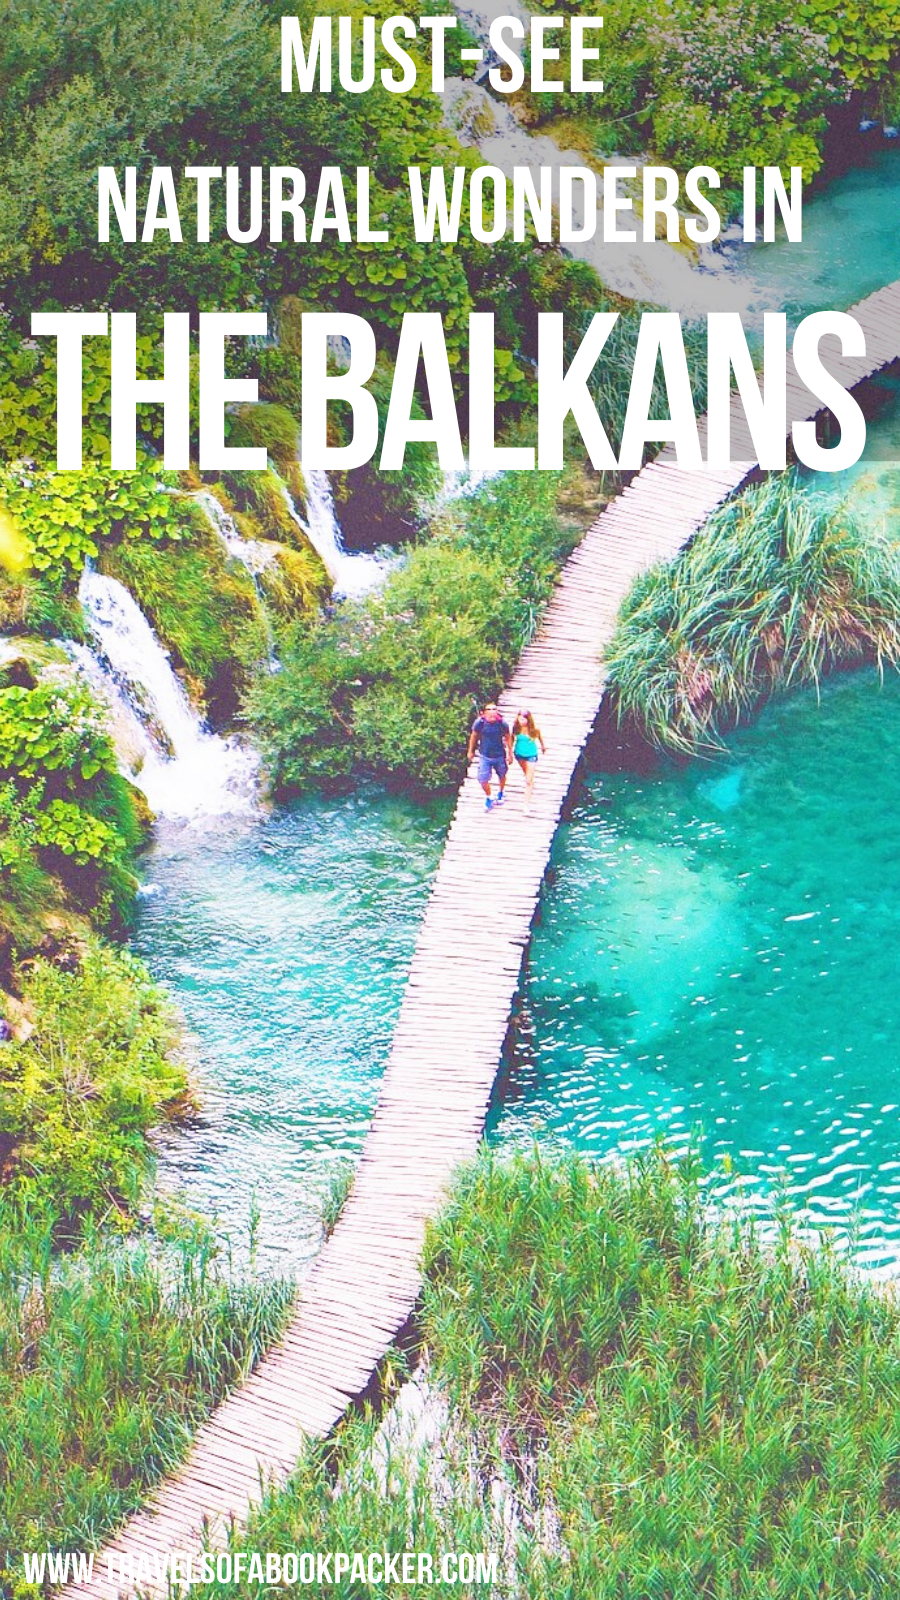 The best natural wonders in the Balkan region. There’s something here for all nature lovers from hikes to waterfalls, mountain scenery to lakes, check out the best natural attractions in the Balkans. #balkan #balkans #easteurope #europe #travel #tra…